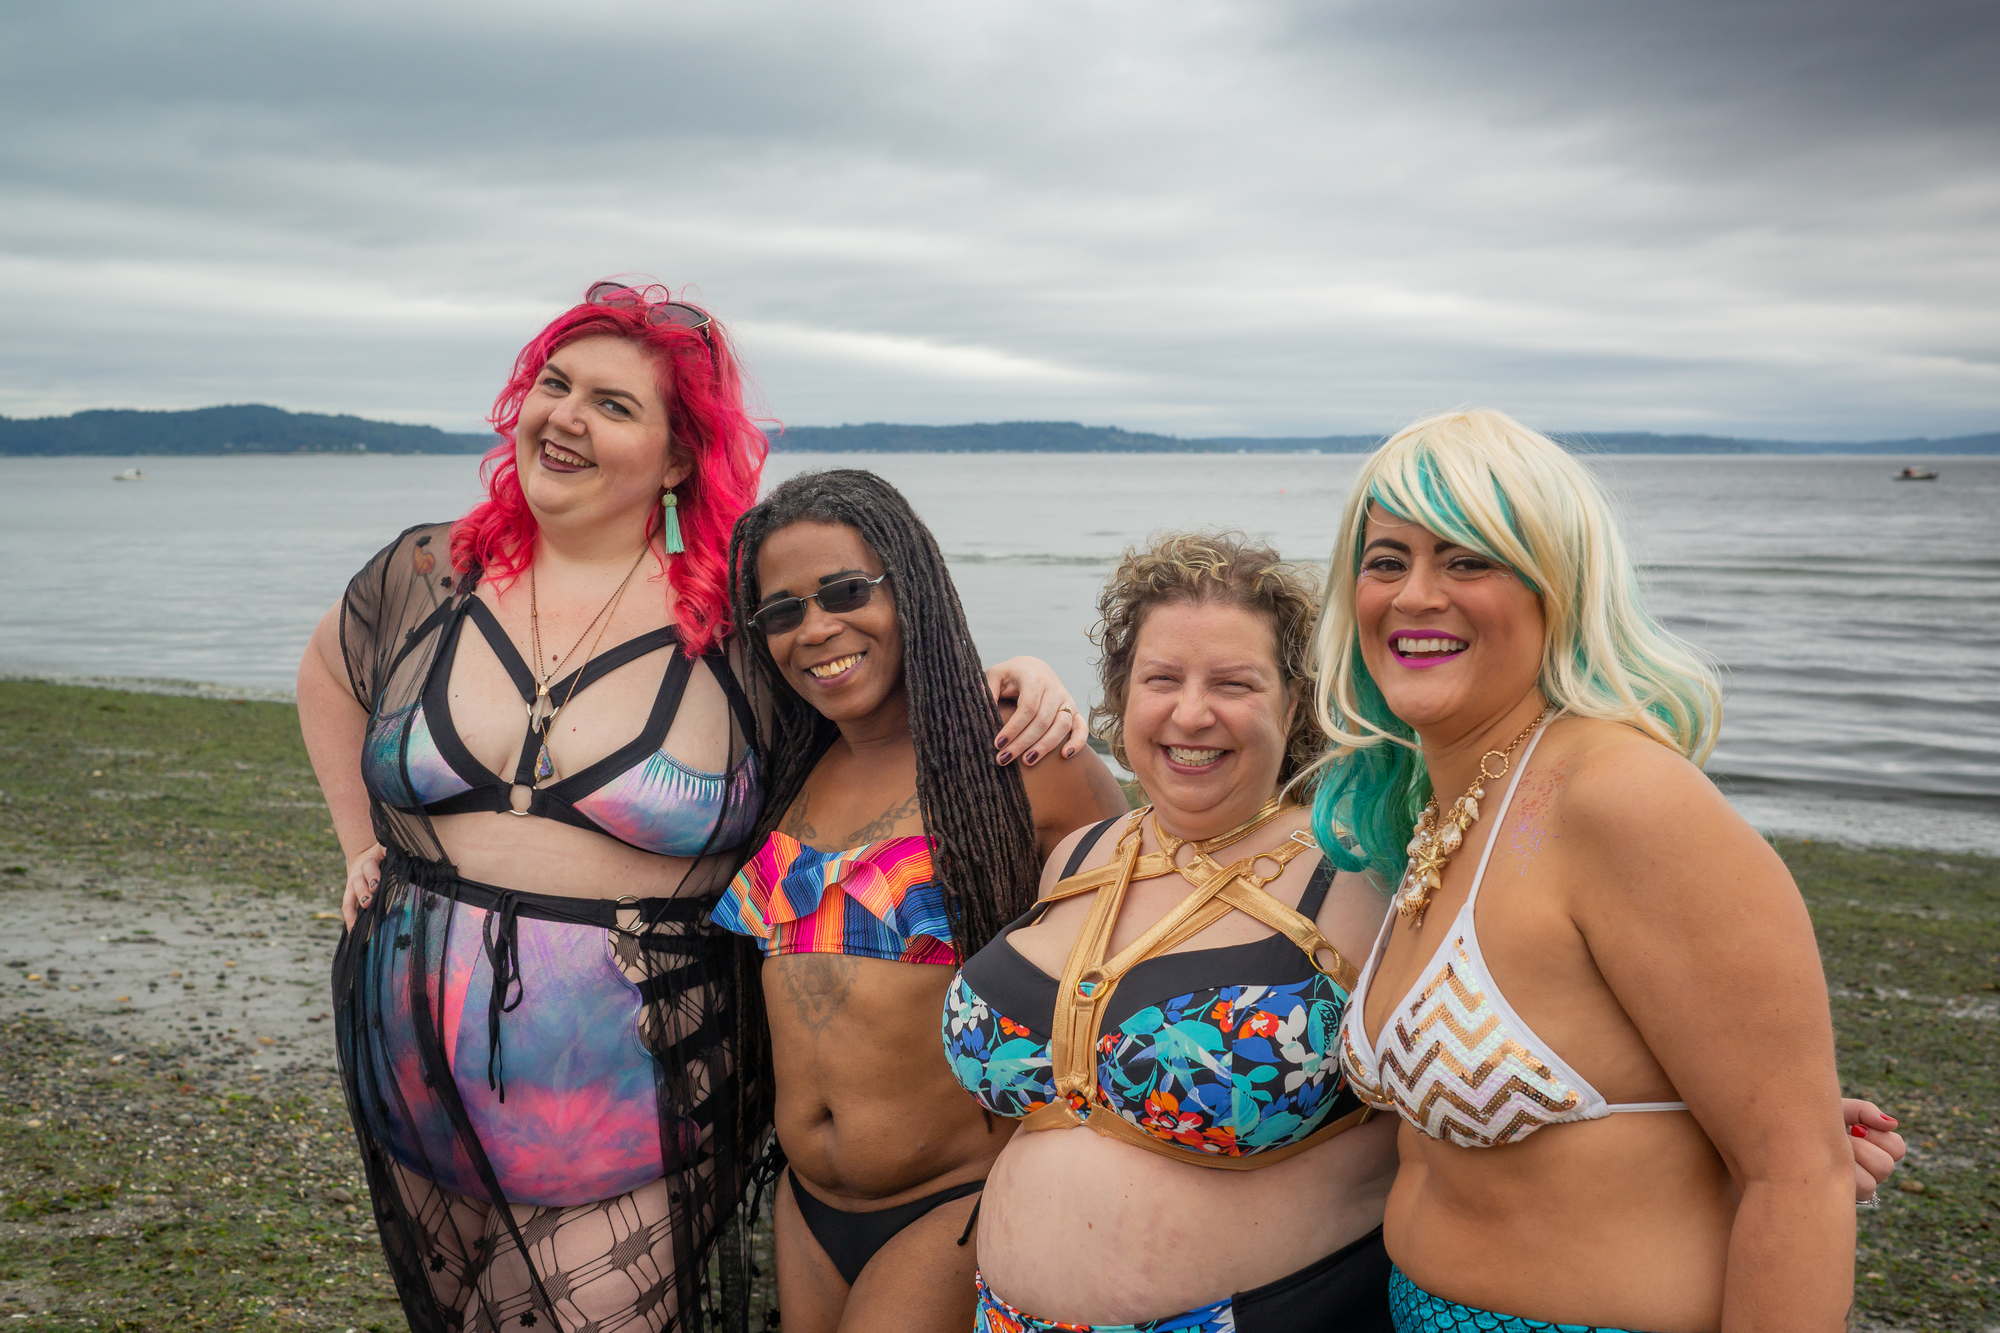 A group of women in swimsuits pose joyfully on a beach in Seattle